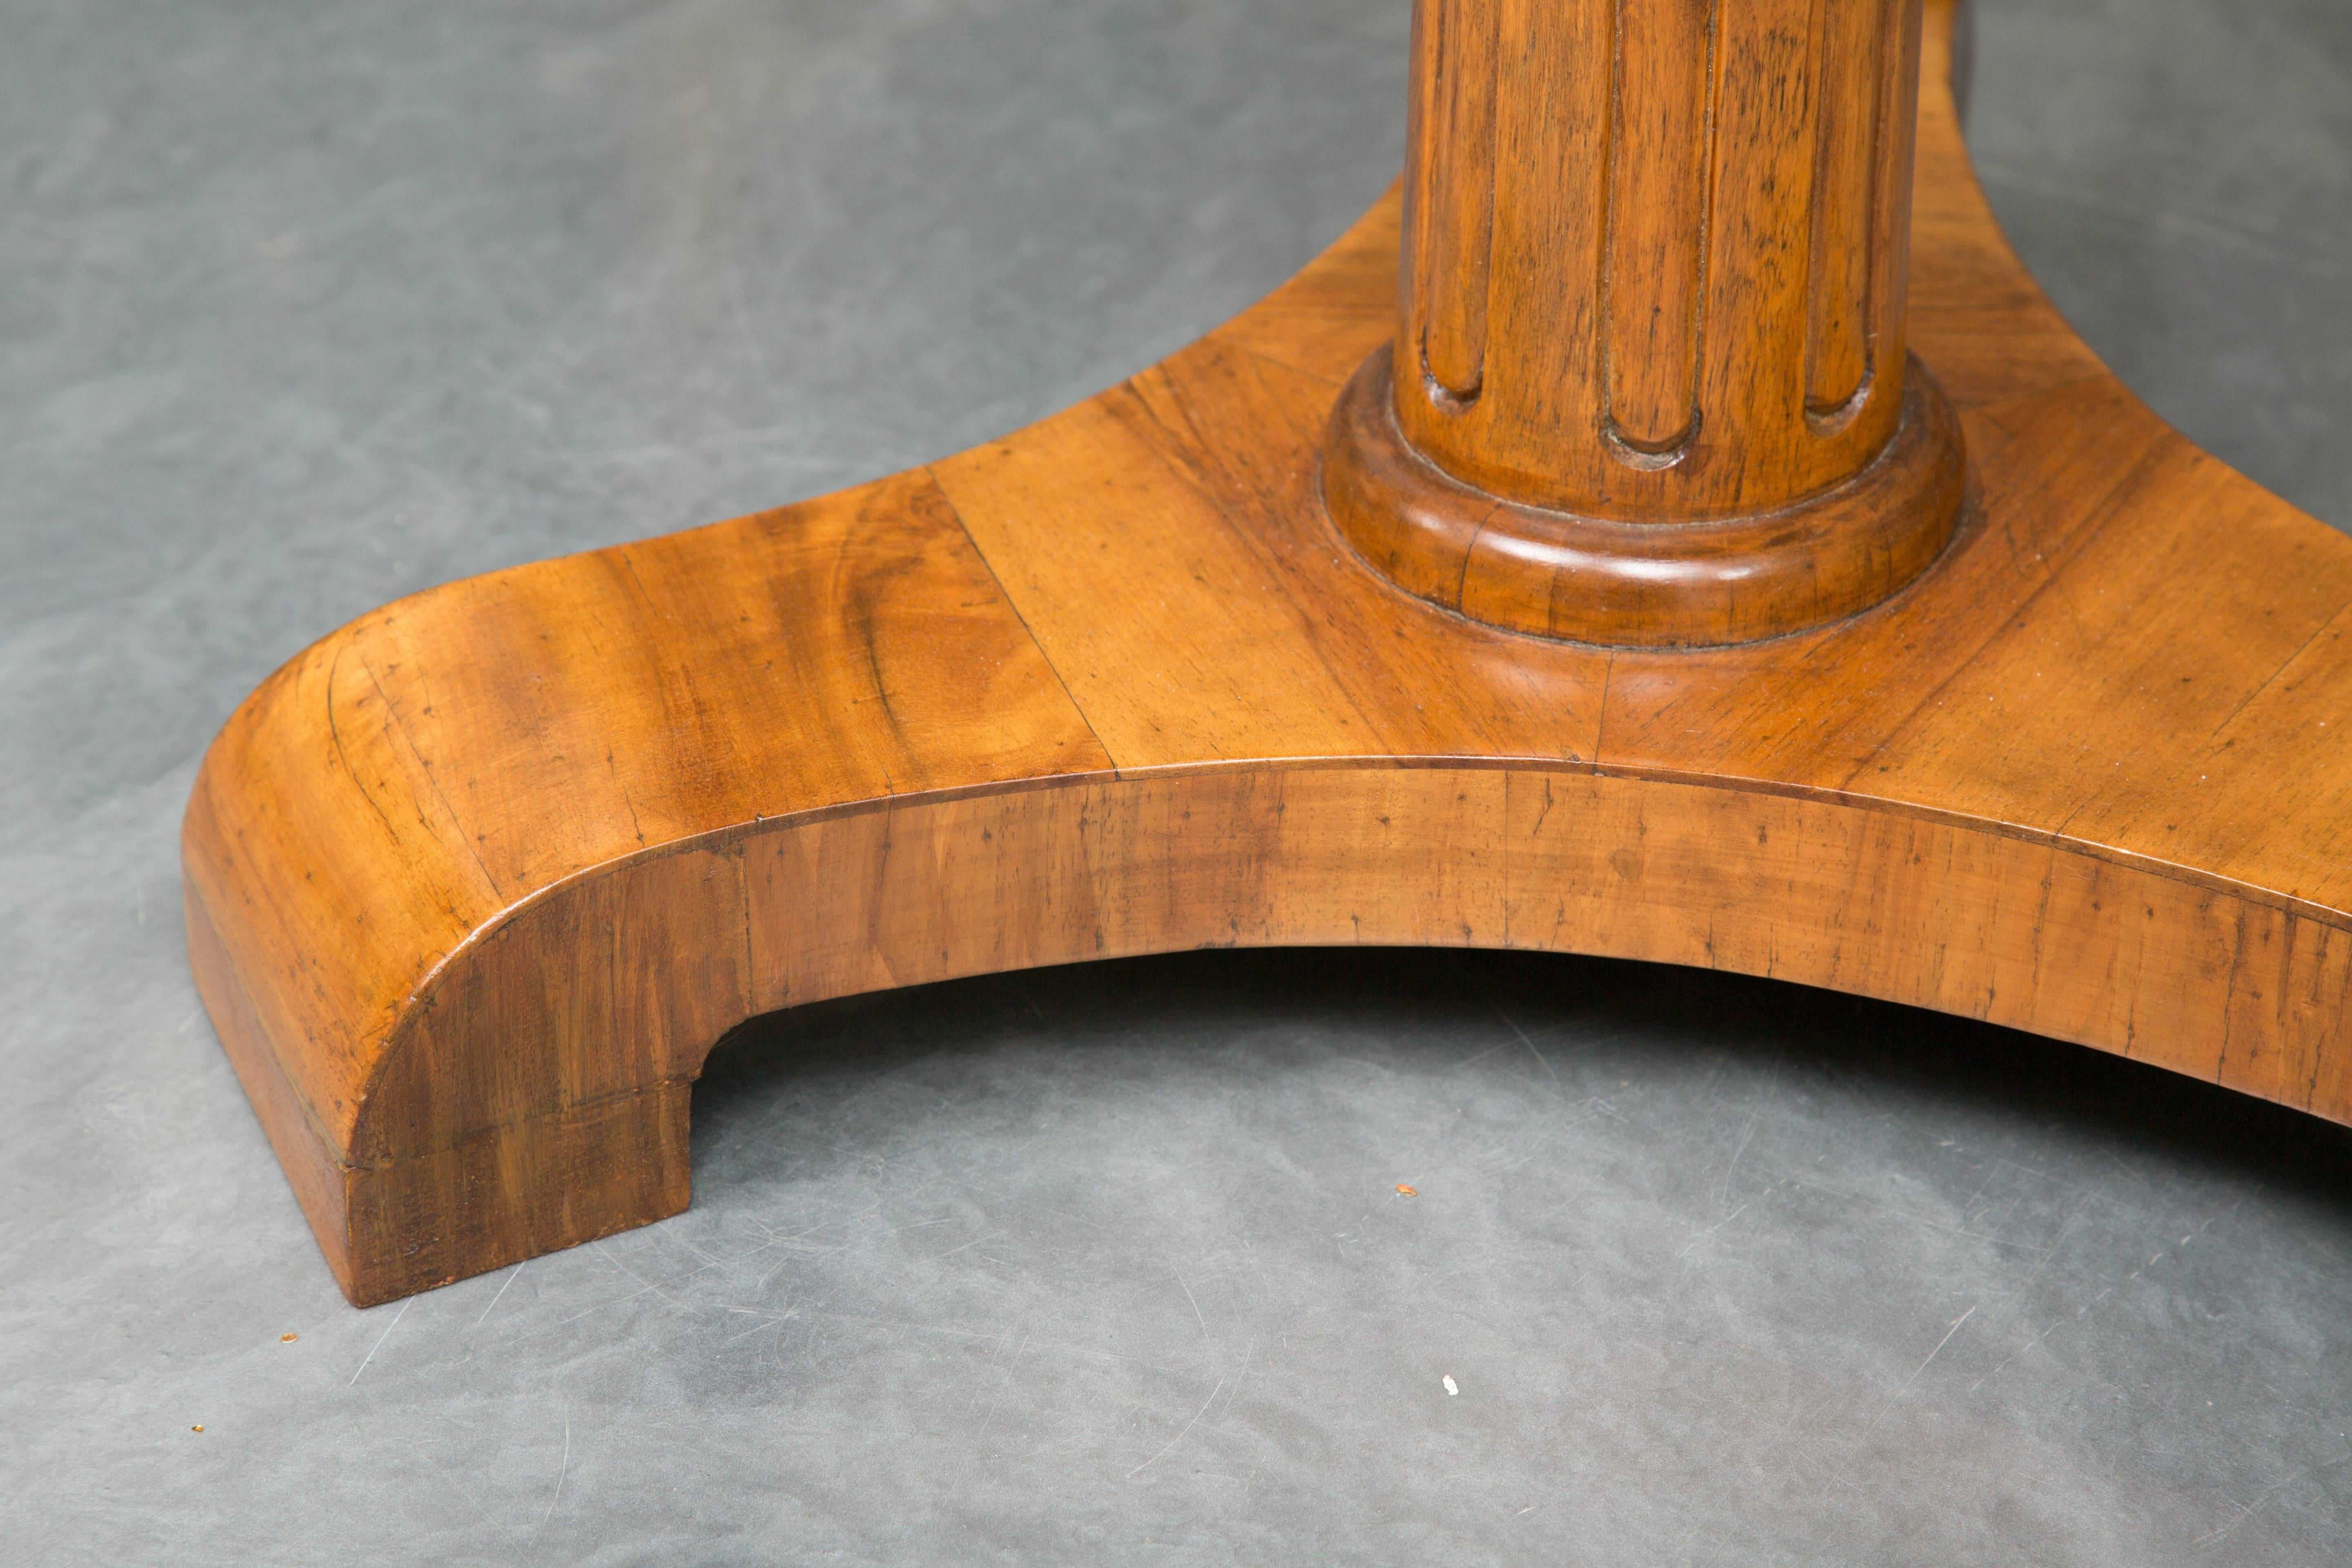 This is a very pleasant Biedermeier cherrywood circular table. The top is designed with pie-slice veneer with a notched wood frieze supported by a round tapering fluted pedestal situated on a tripartite plinth, circa 1830.